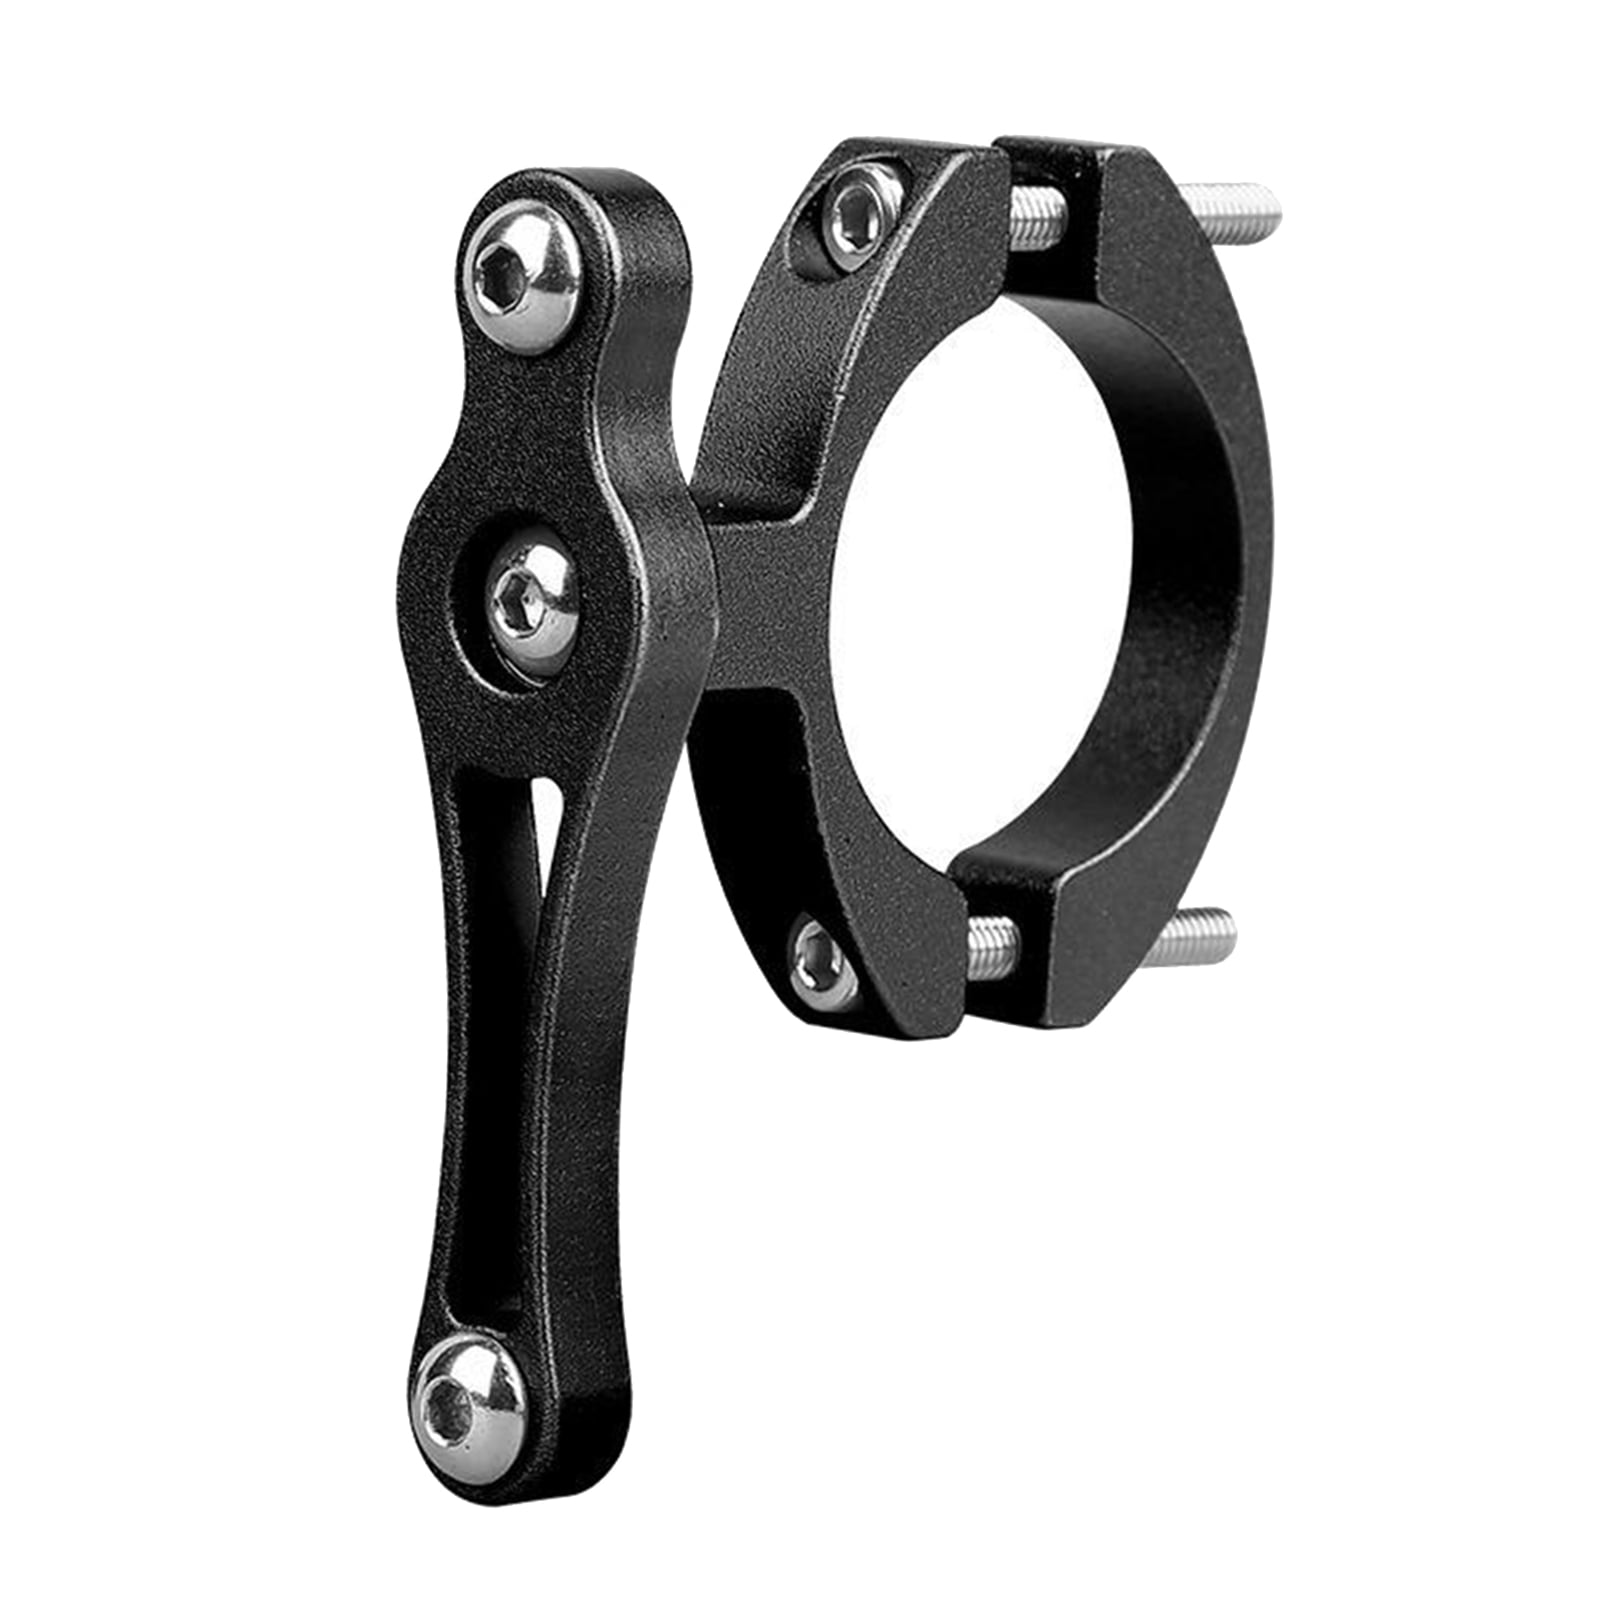 Bicycle Water Bottle Cage Holder Clamp Clip Handlebar Bracket Mount Adapter 